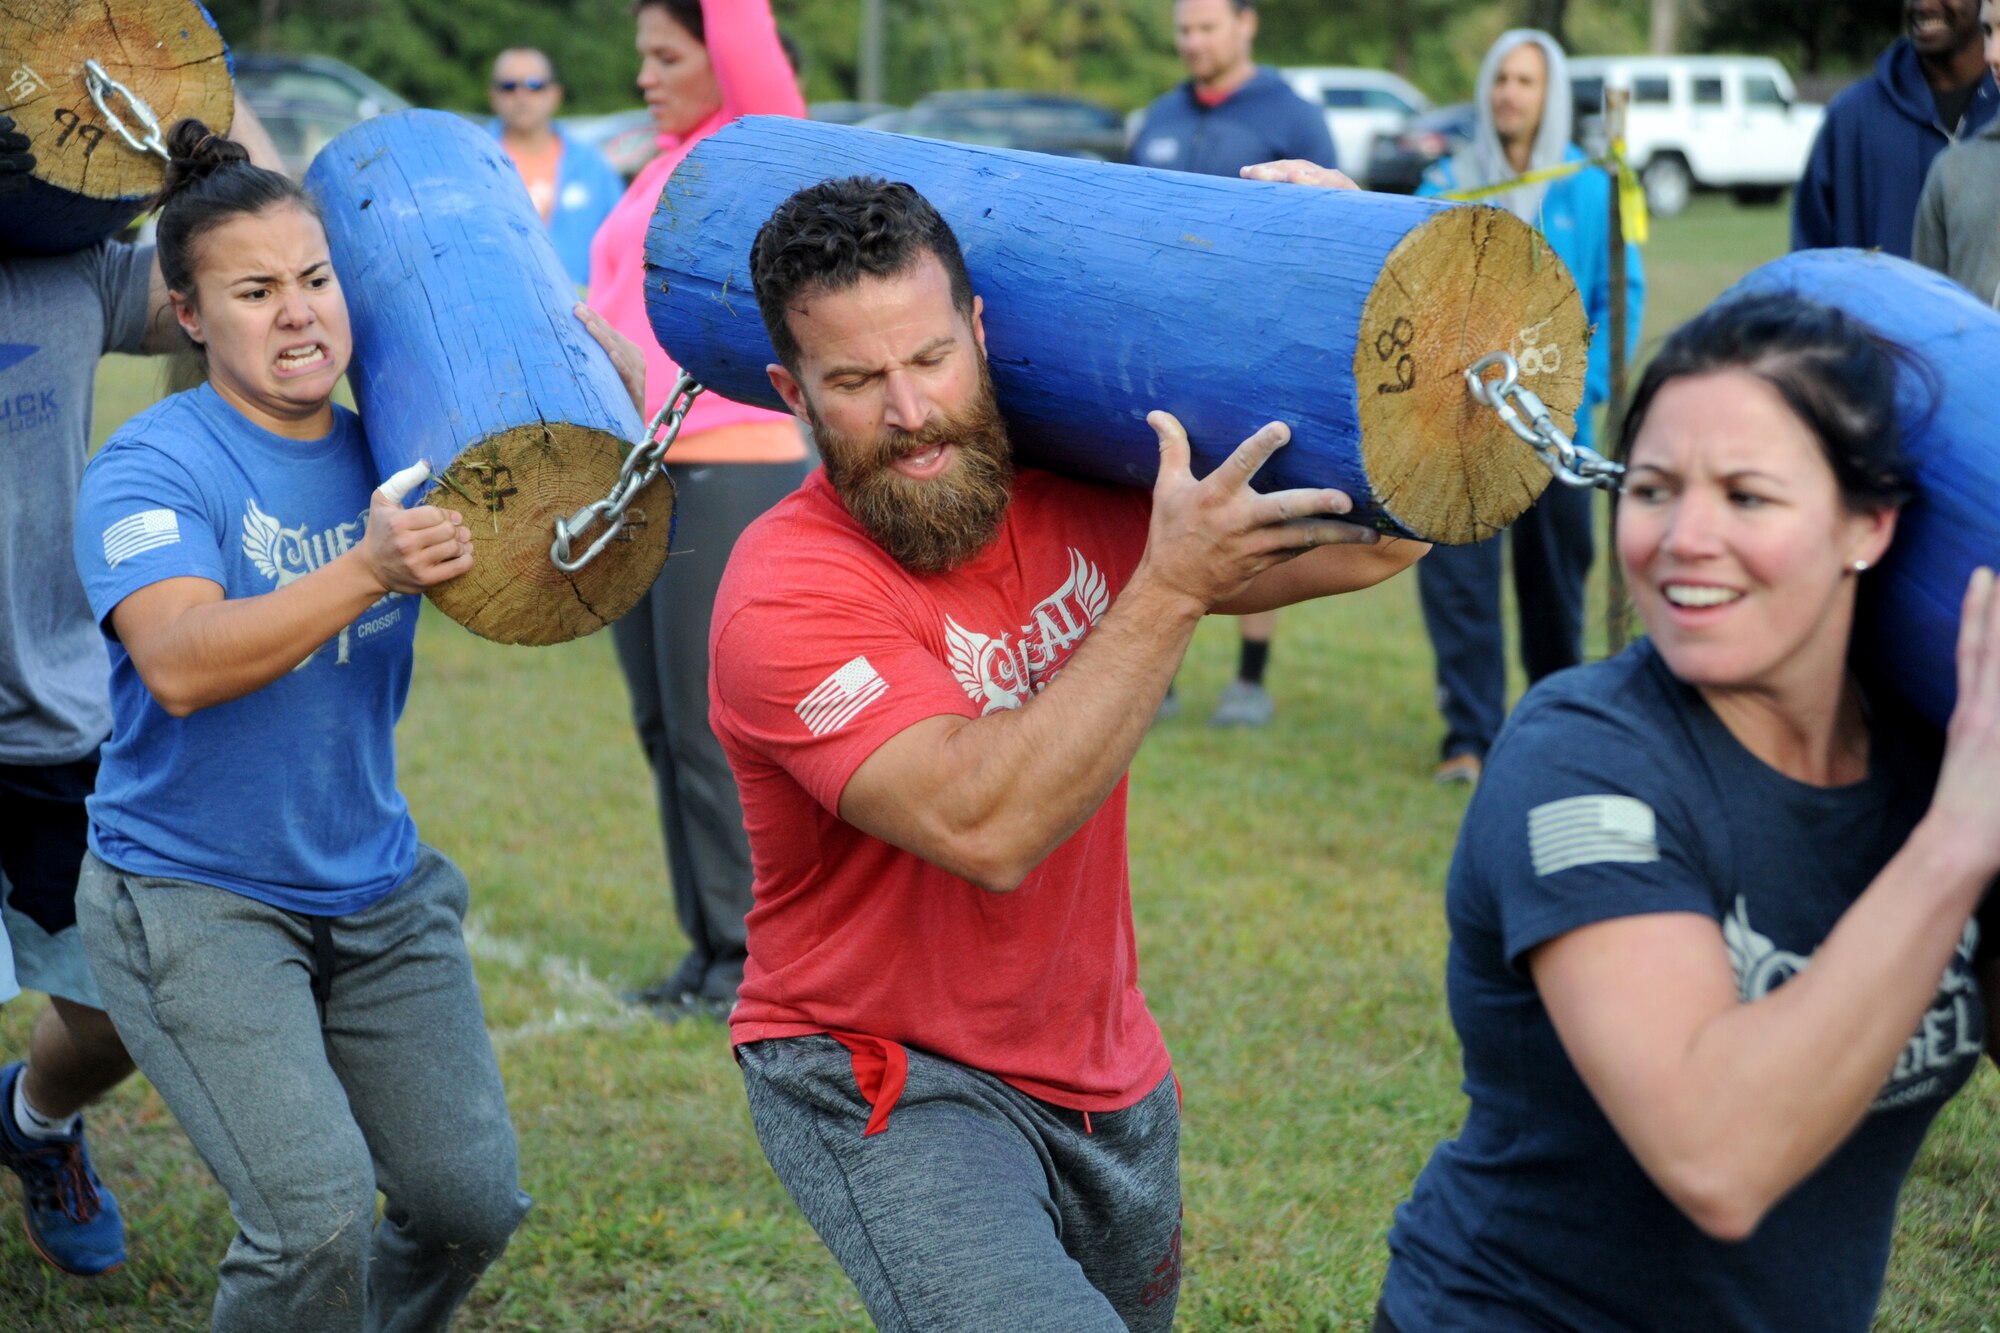 Airman 1st Class Karla Montes, 436th Dental Squadron dental assistant, left, carries a log during the group challenge at the Eastern Shore Affiliate Challenge Oct. 17, 2015, in Georgetown, Del. Mike and Christen Georgules, middle and right, owners and coaches at Crossfit Sweat Angel, train many military clients. (U.S. Air Force photo/Staff Sgt. Elizabeth Morris)